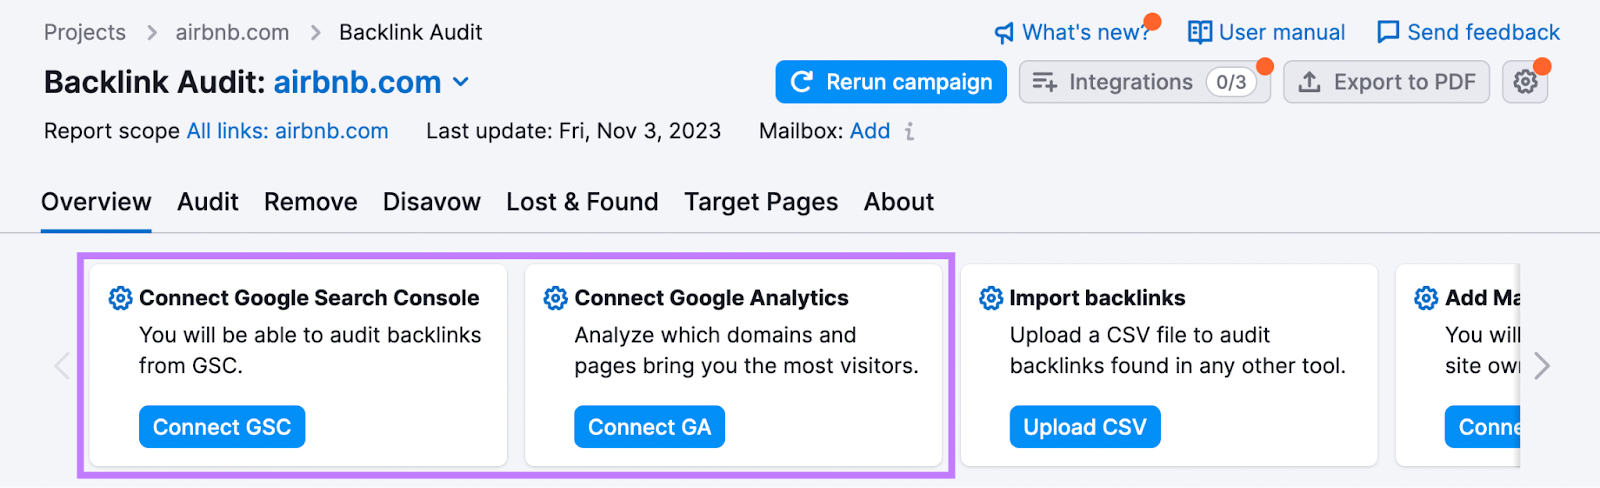 "Connect Google Search Console," and "Connect Google Analytics" widgets highlighted in Backlink Audit